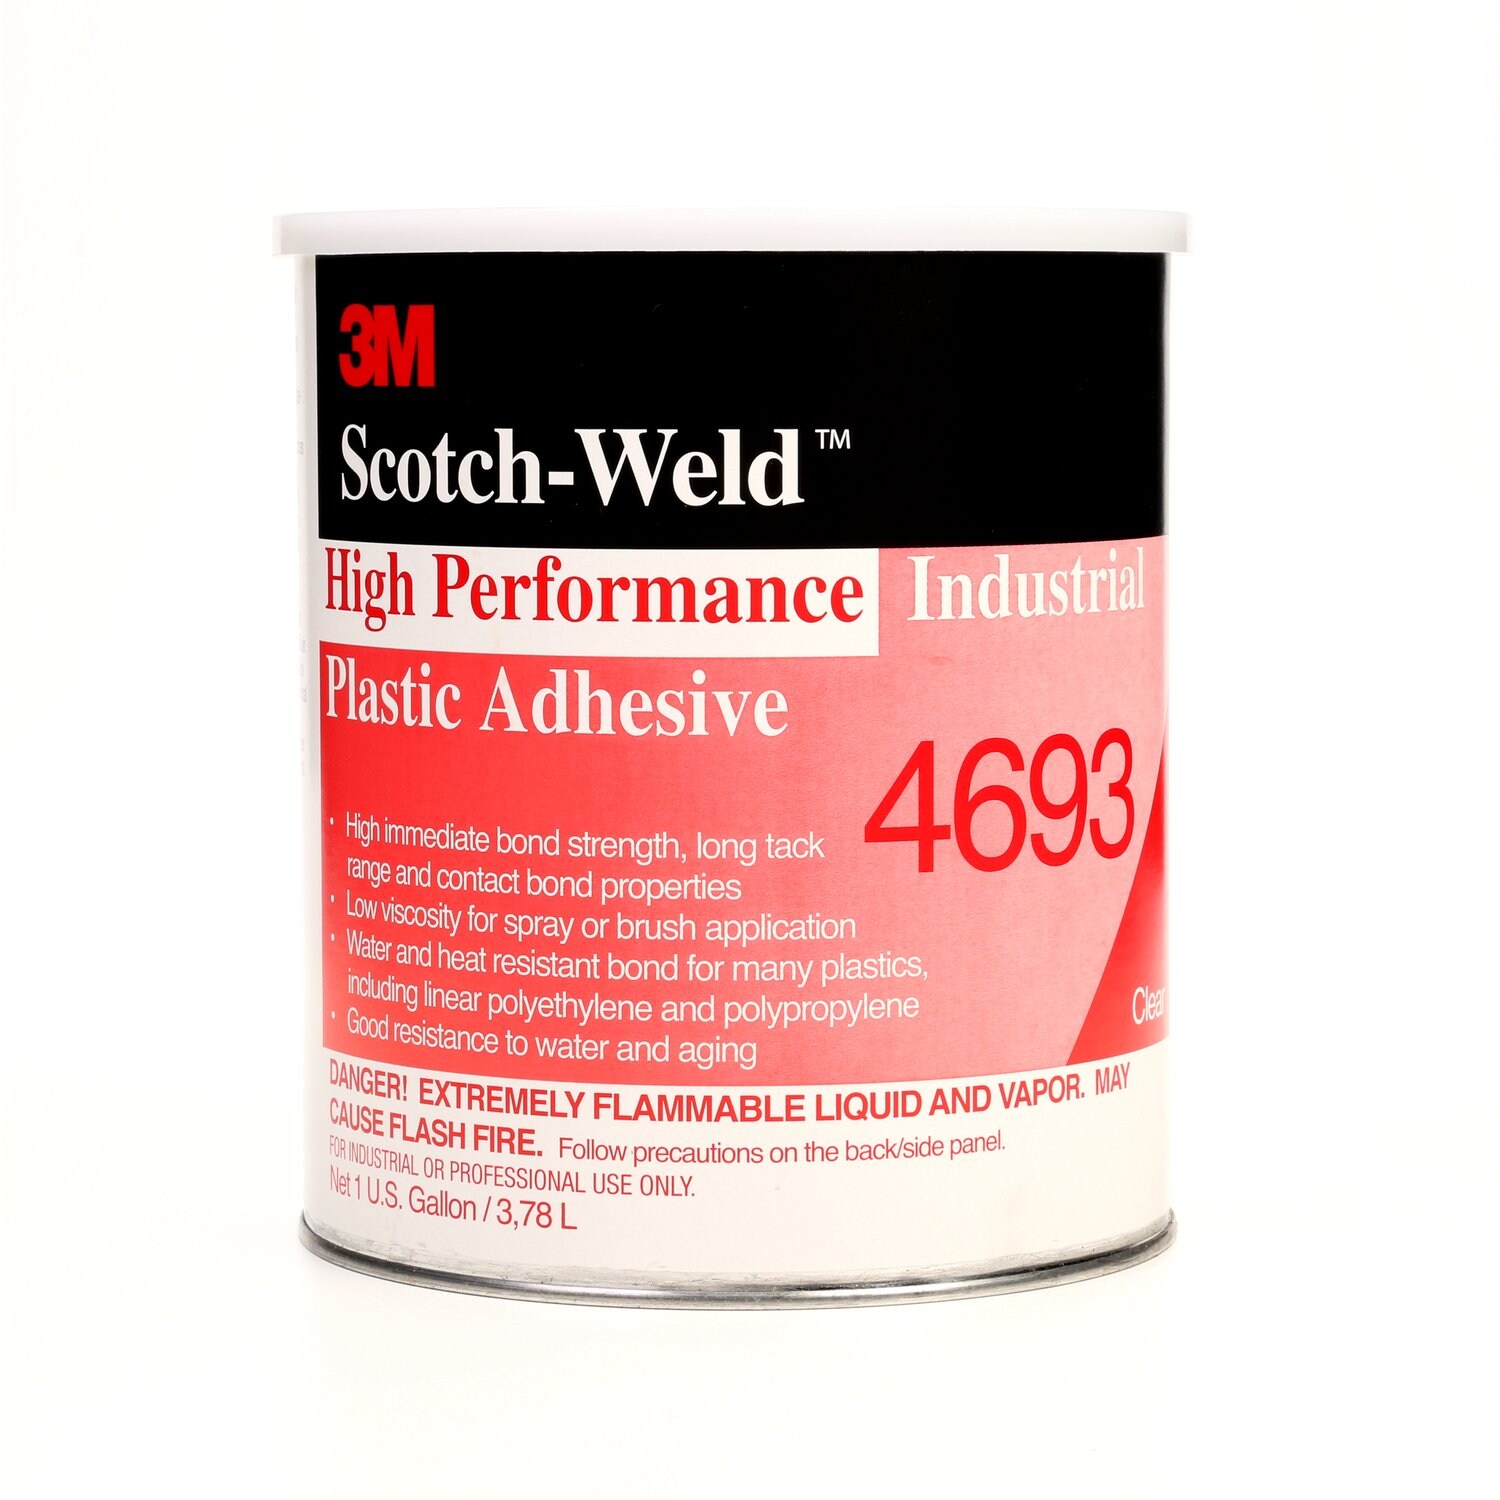 7000046575 - 3M High Performance Industrial Plastic Adhesive 4693, Light Amber, 1
Gallon Can, 4/case